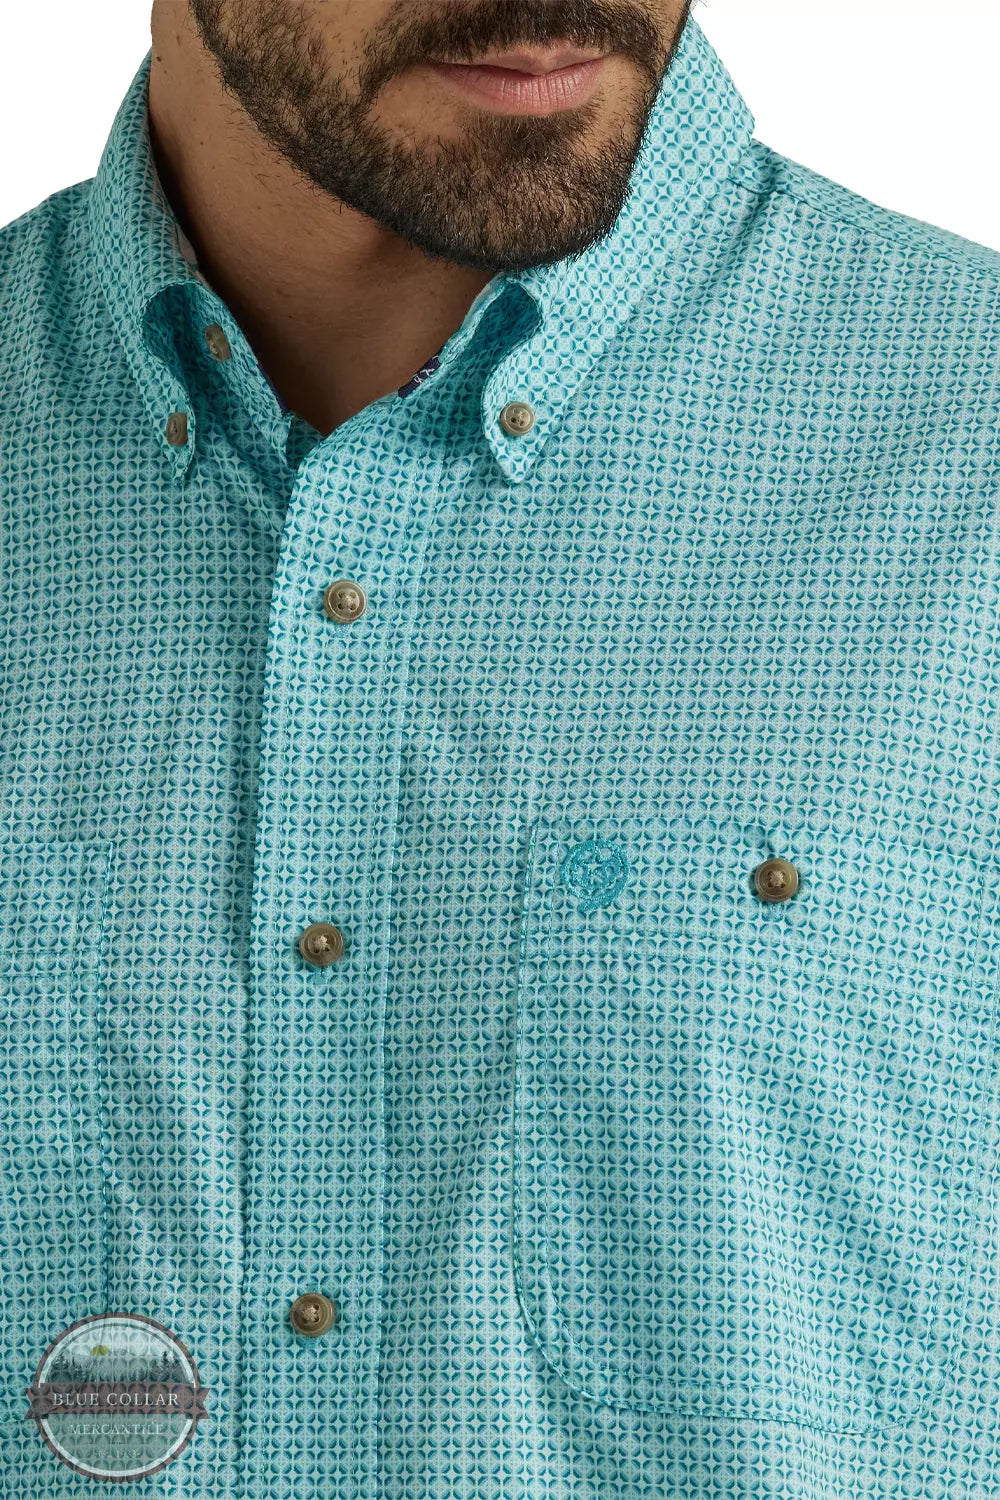 Wrangler 112338103 George Strait Long Sleeve One Pocket Button Down Shirt in Teal Print Detail View